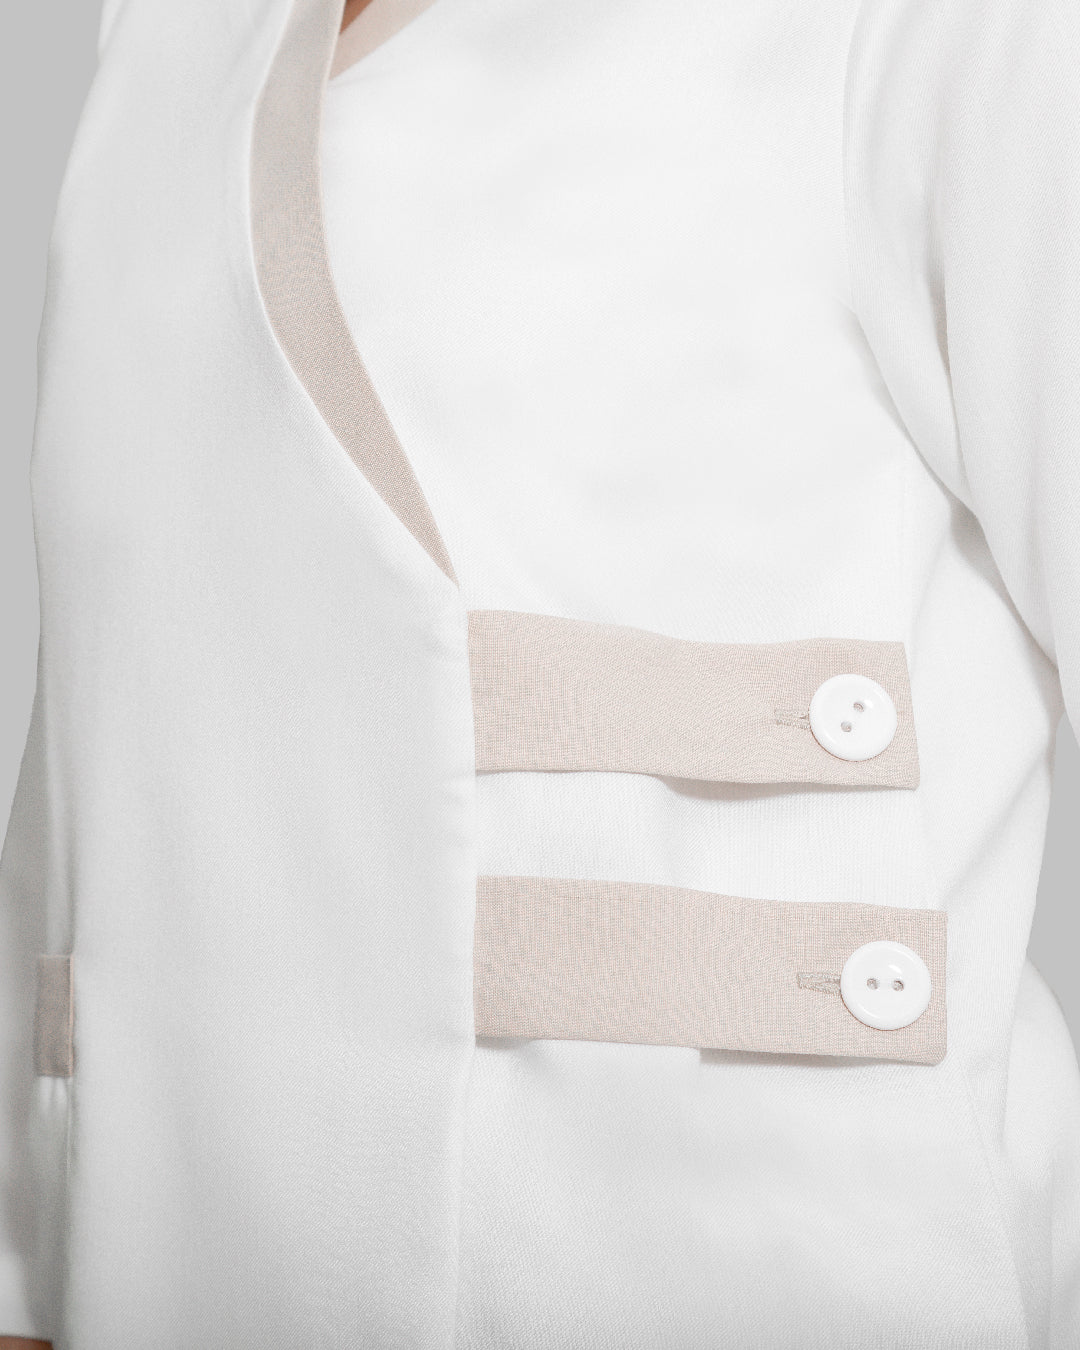 Simple Chic | Double Belt | Offwhite.Beige